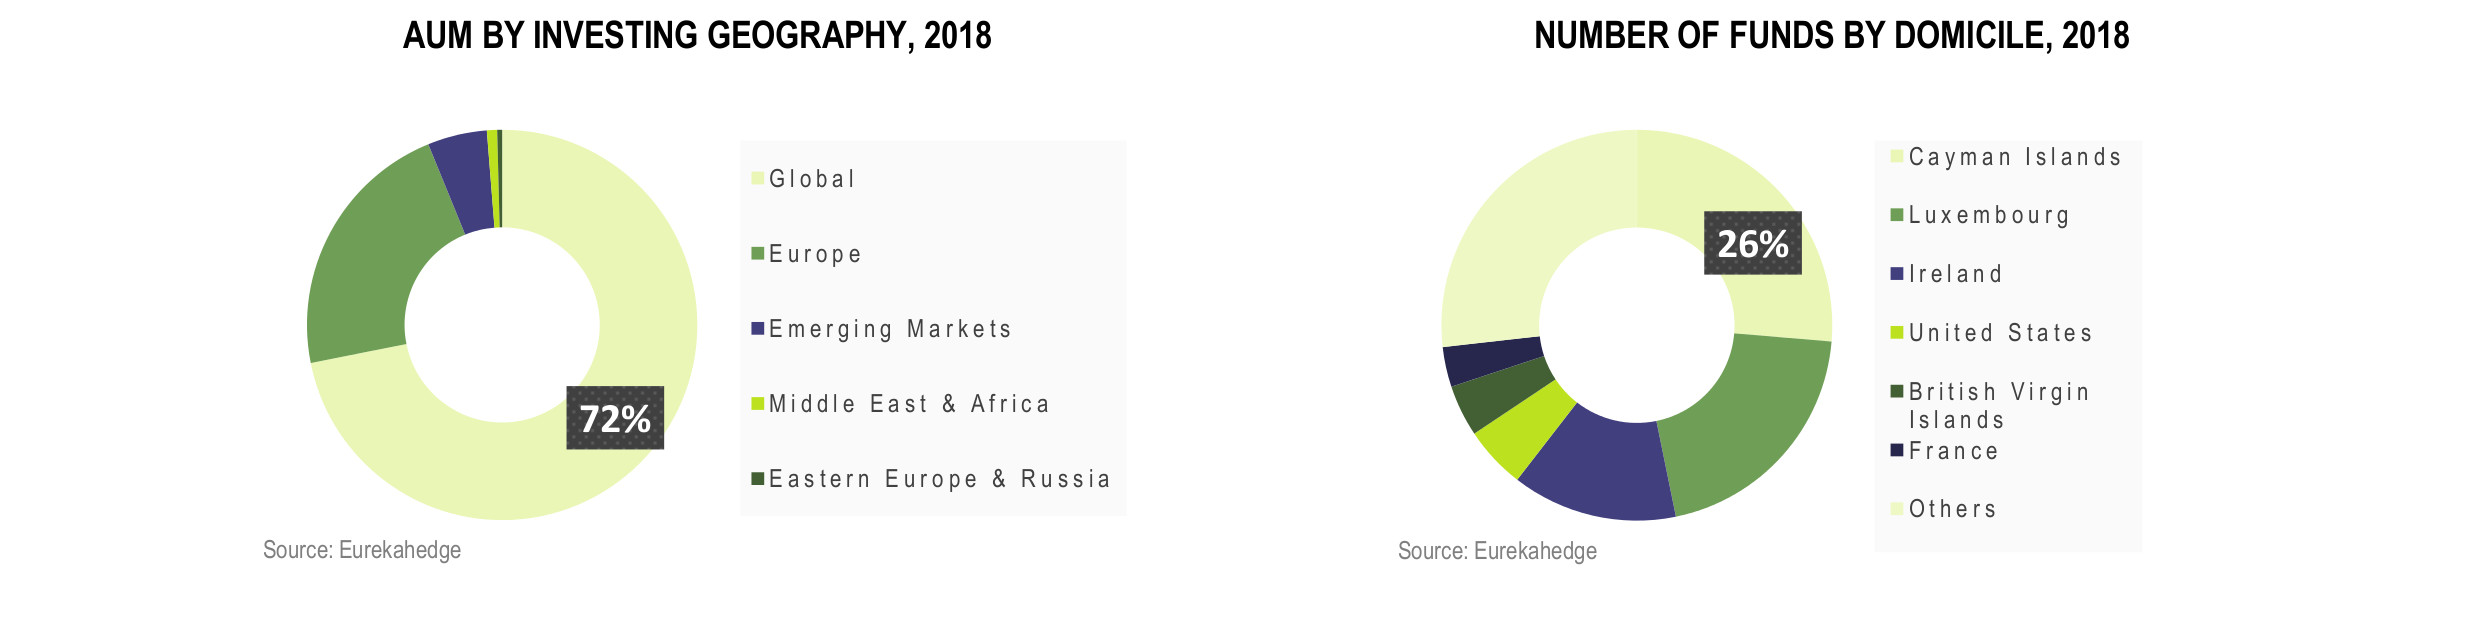 European Hedge Funds Infographic December 2018 - aum by investing geography, aum by strategy